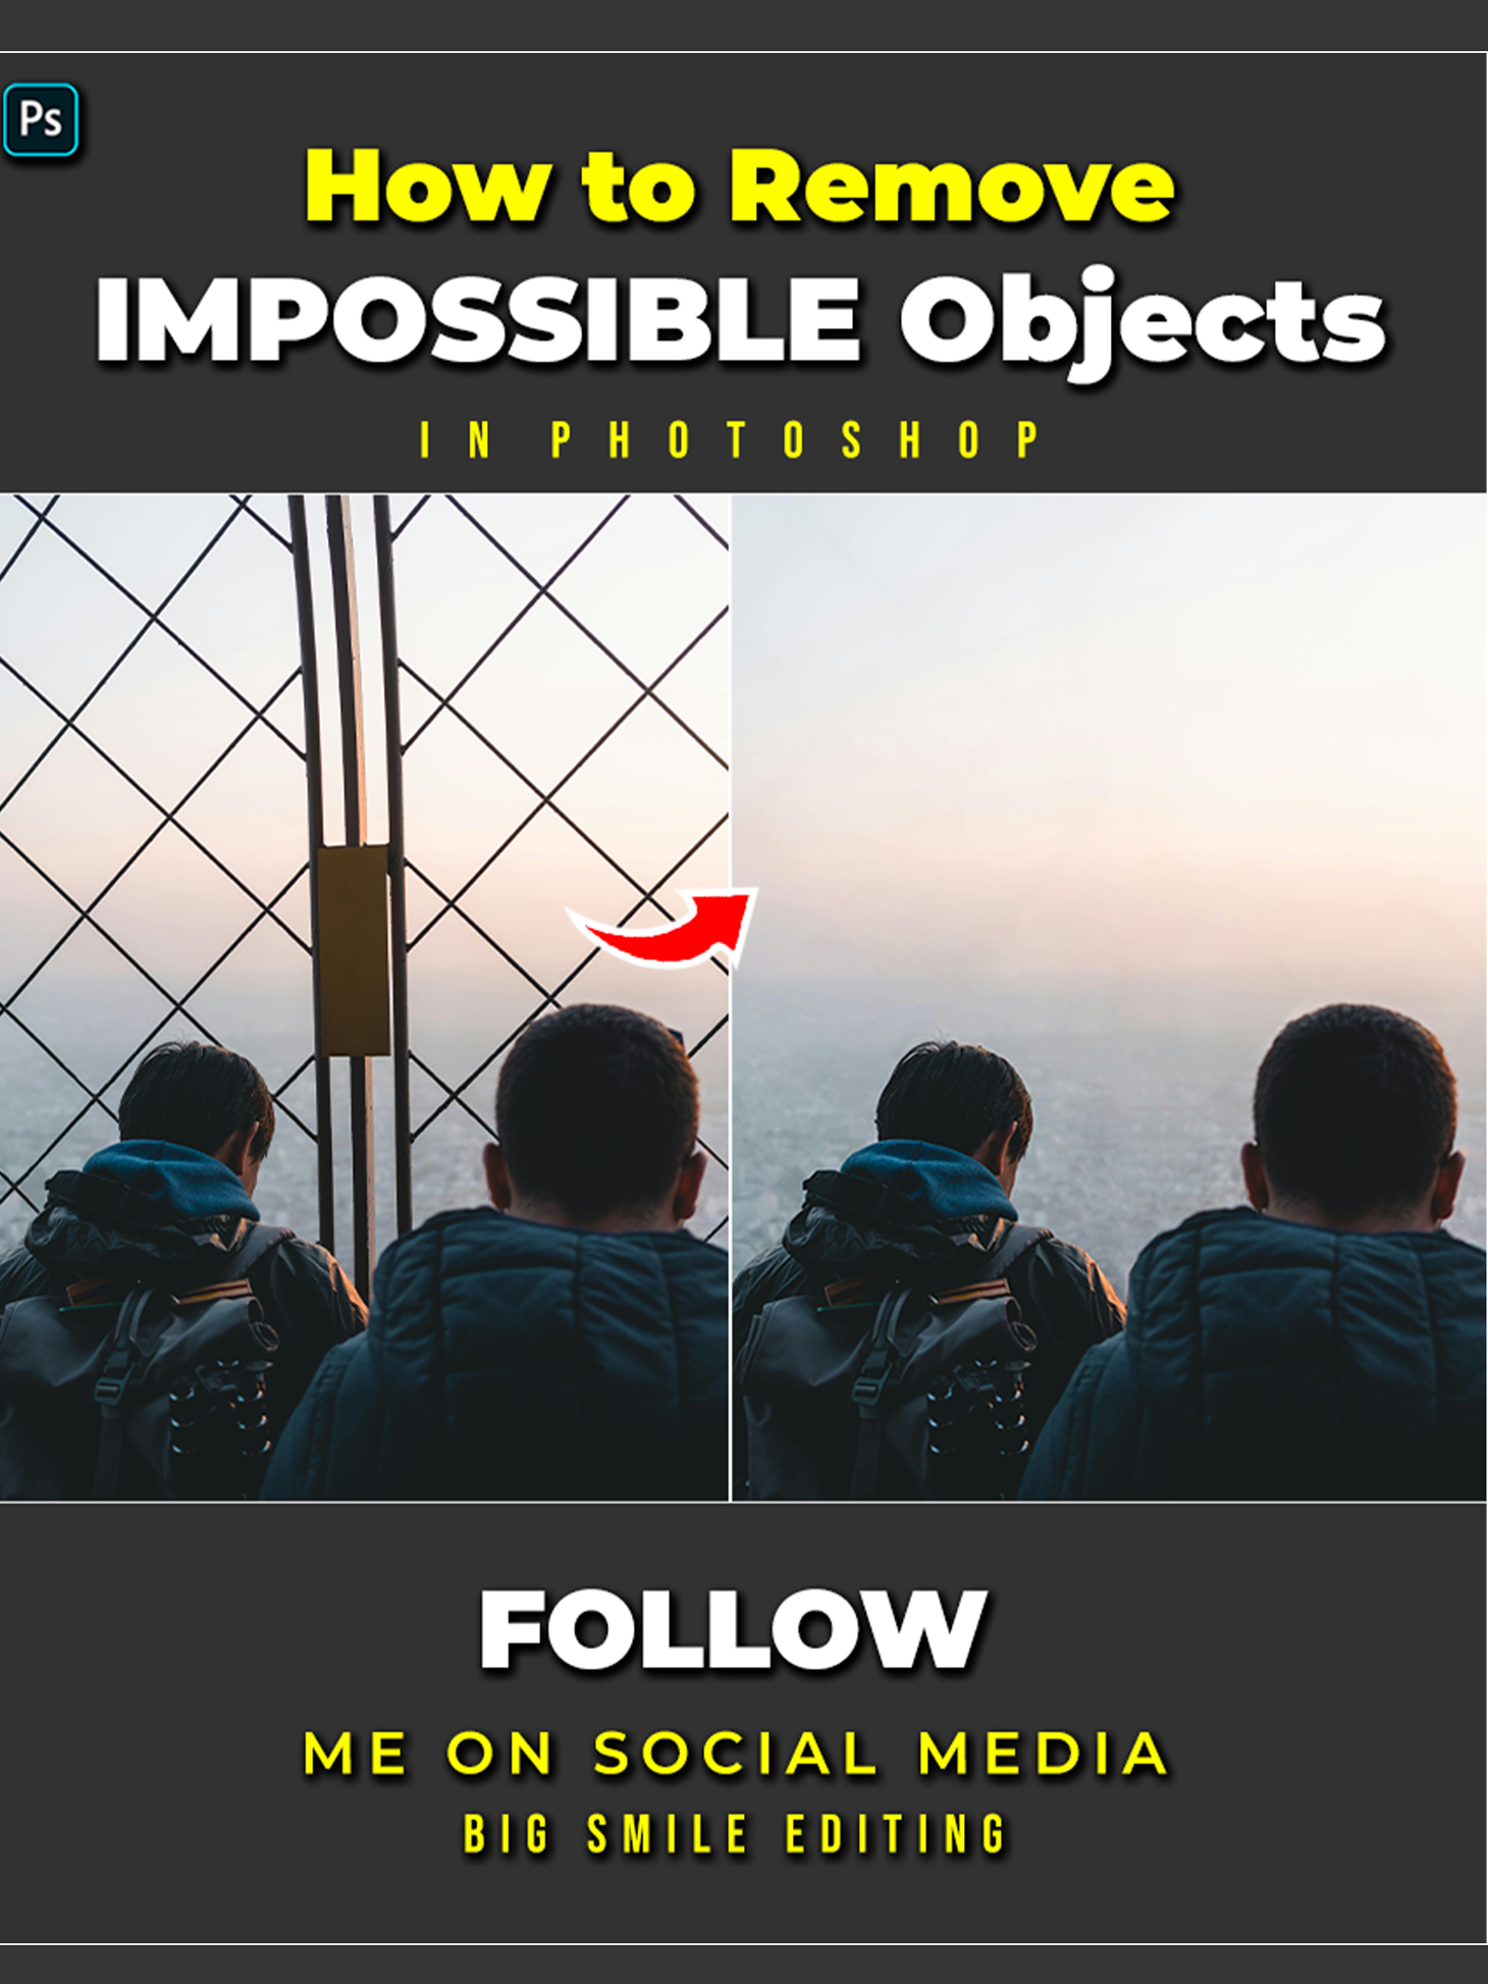 How to remove impossible objects in photoshop #photoshoptricks#tutorial#tutorials#designer#photoshop#photography#adobe#bigsmileediting